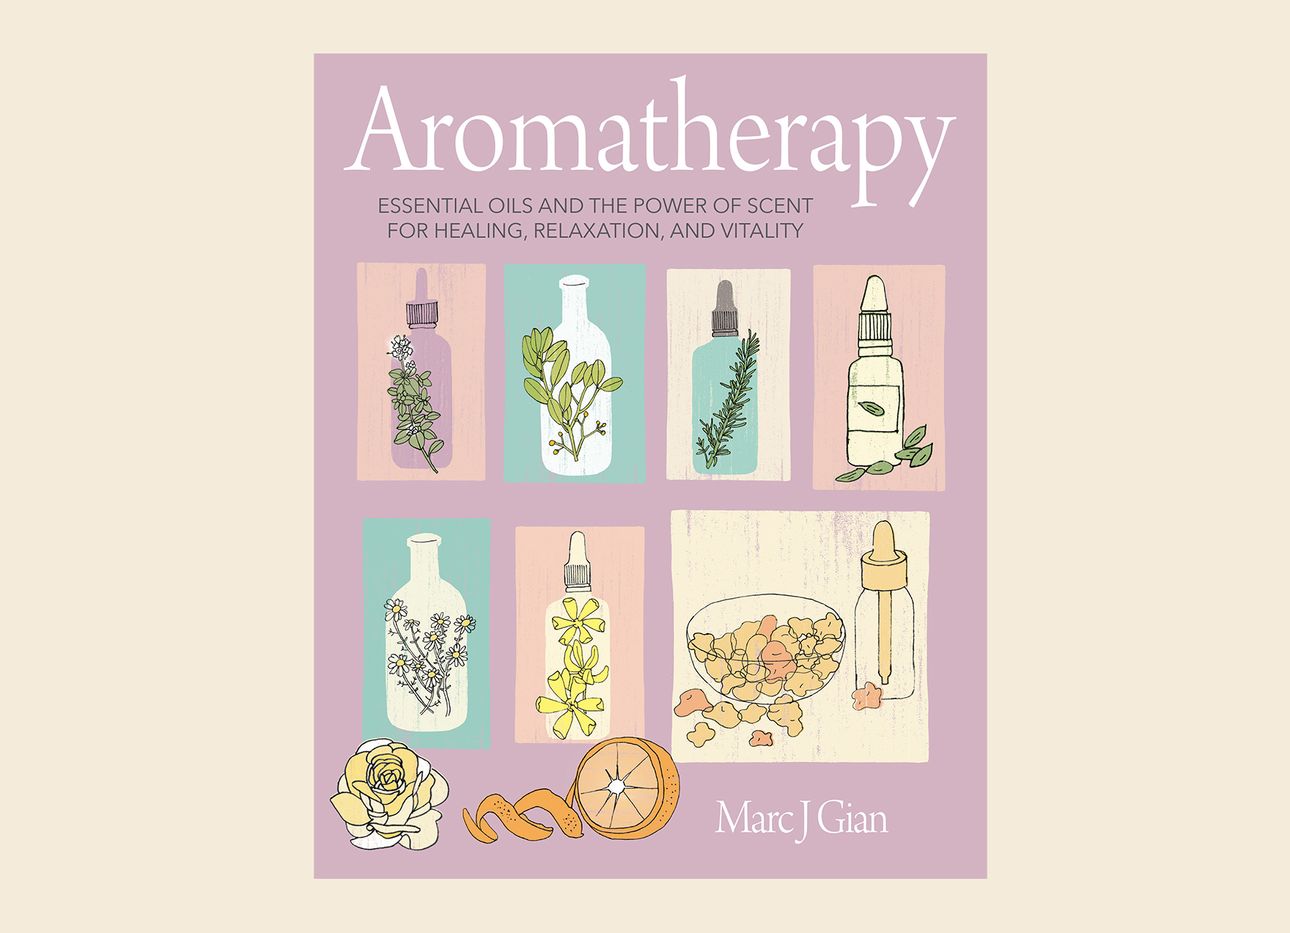 Marc J. Gian's book Aromatherapy: Essential Oils and the Power of Scent for Healing, Relaxation, and Vitality 